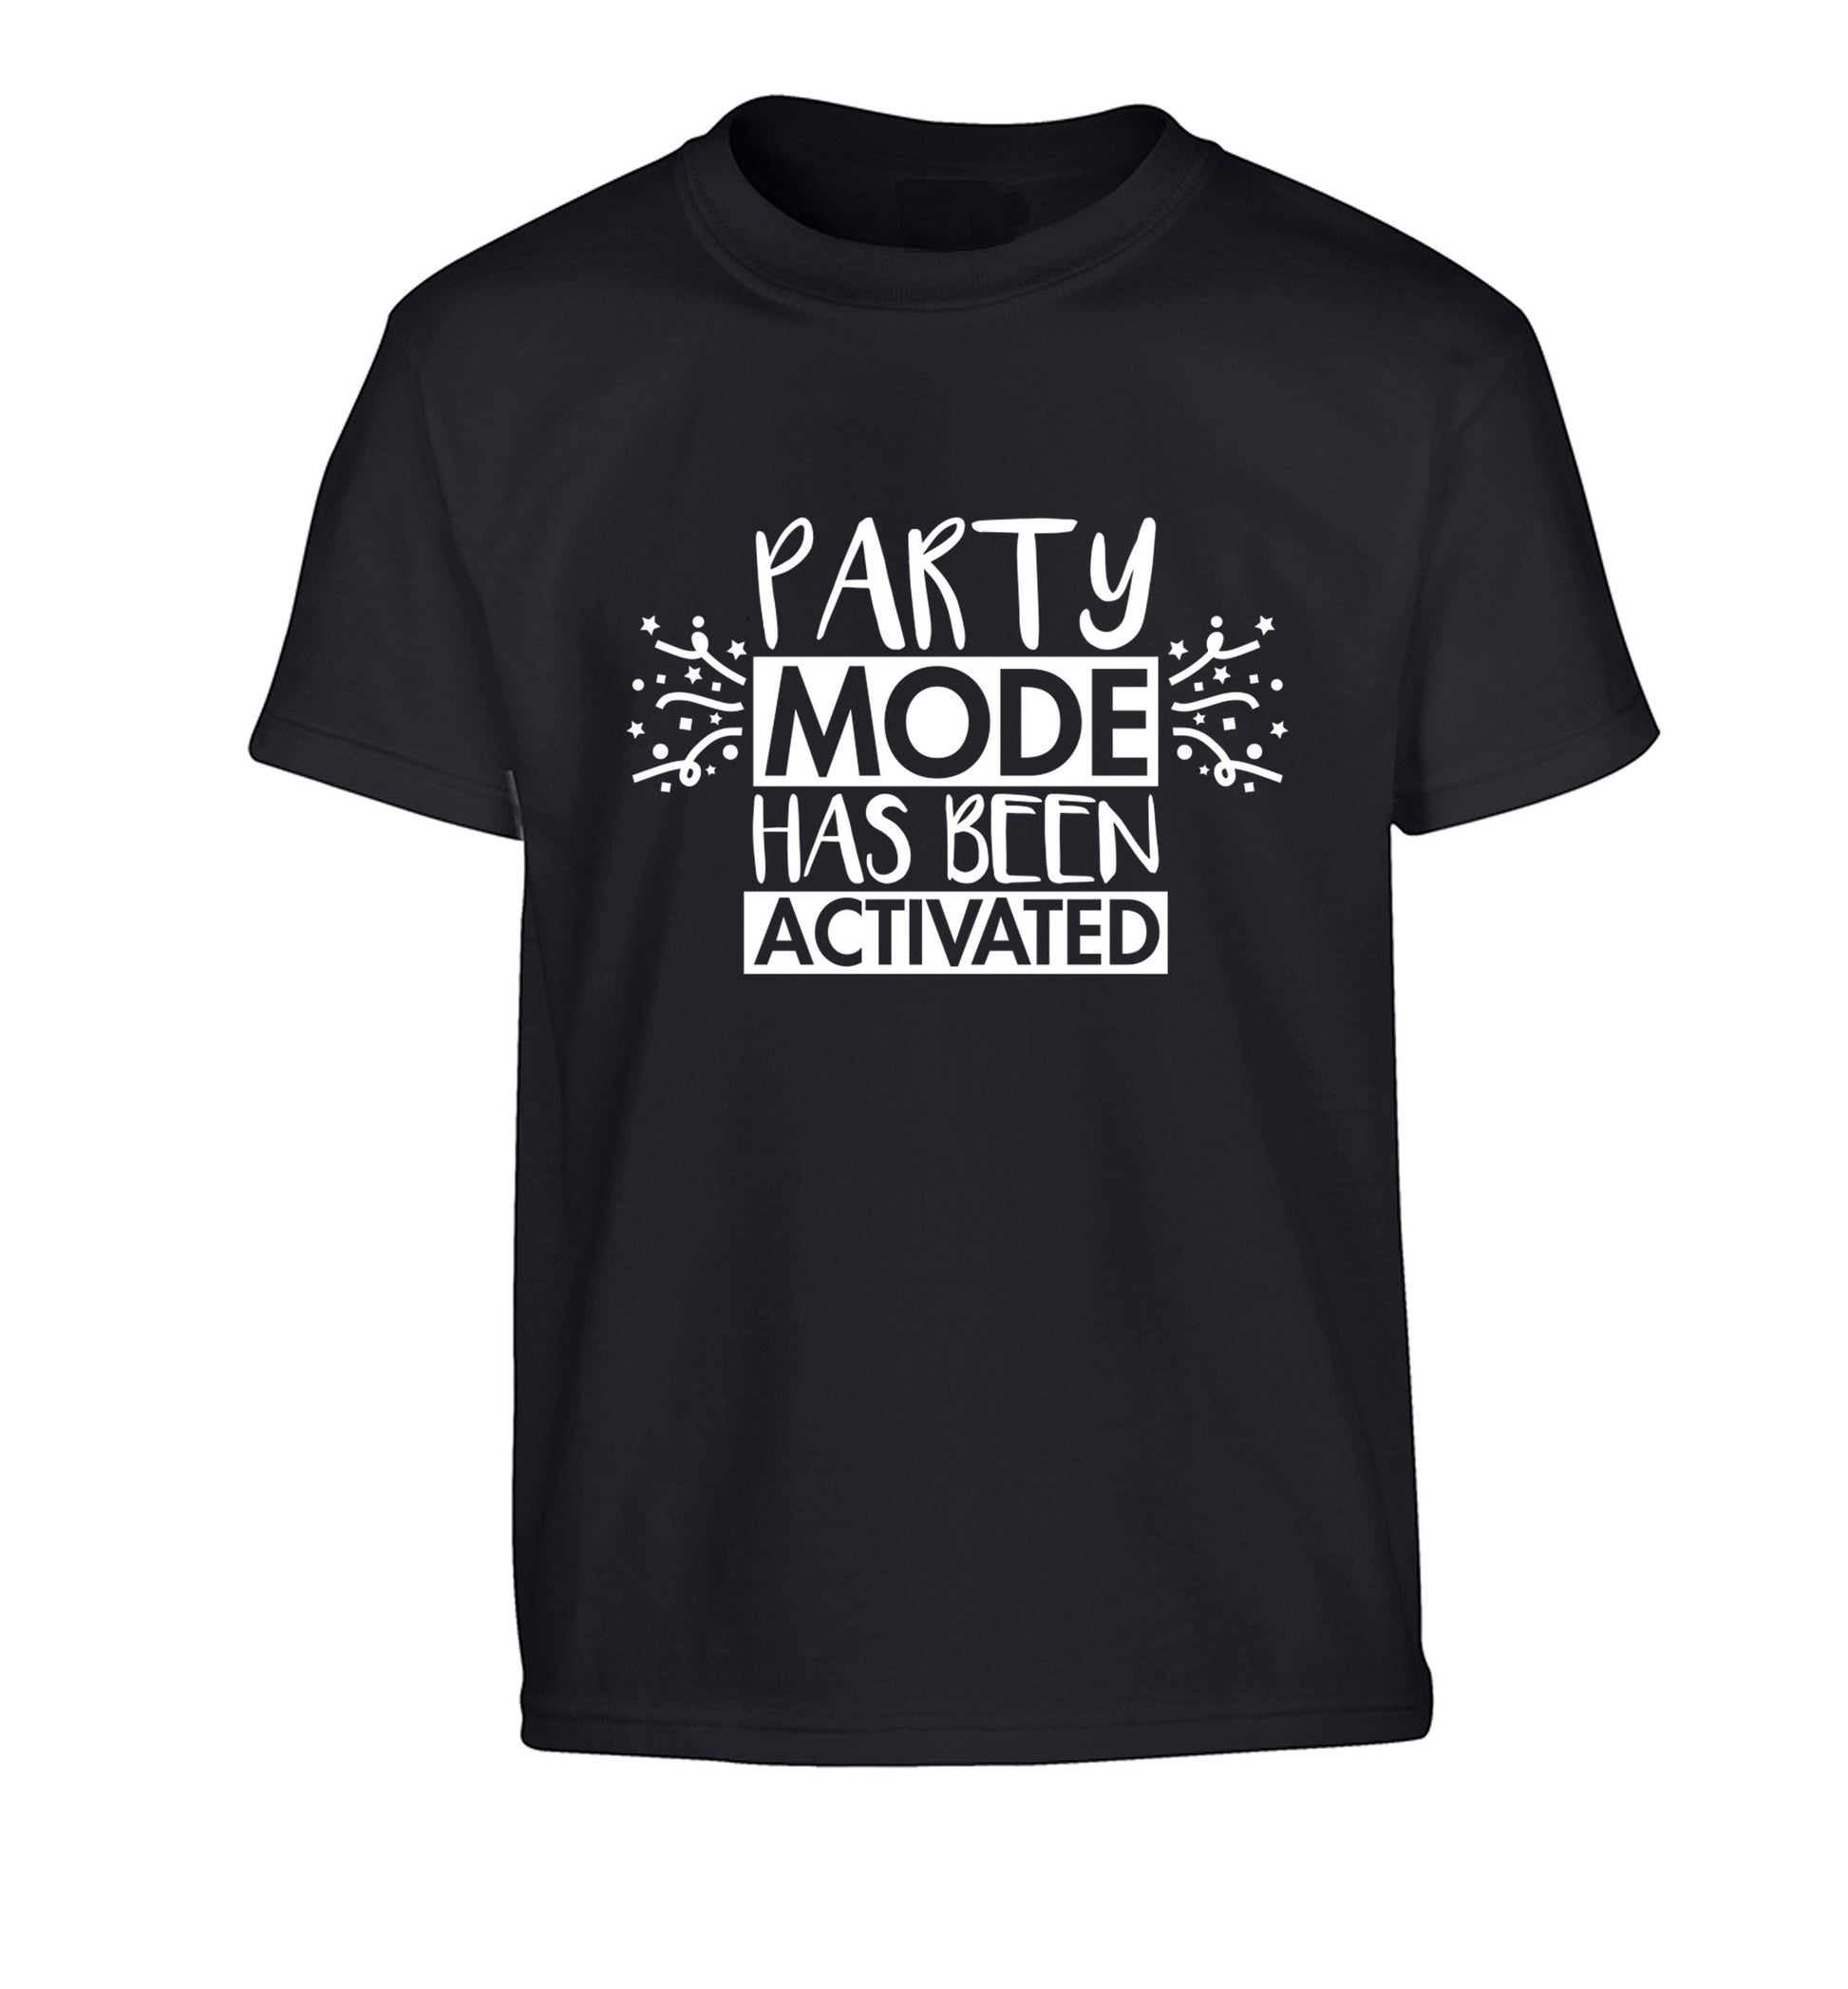 Please do not disturb party mode has been activated Children's black Tshirt 12-14 Years